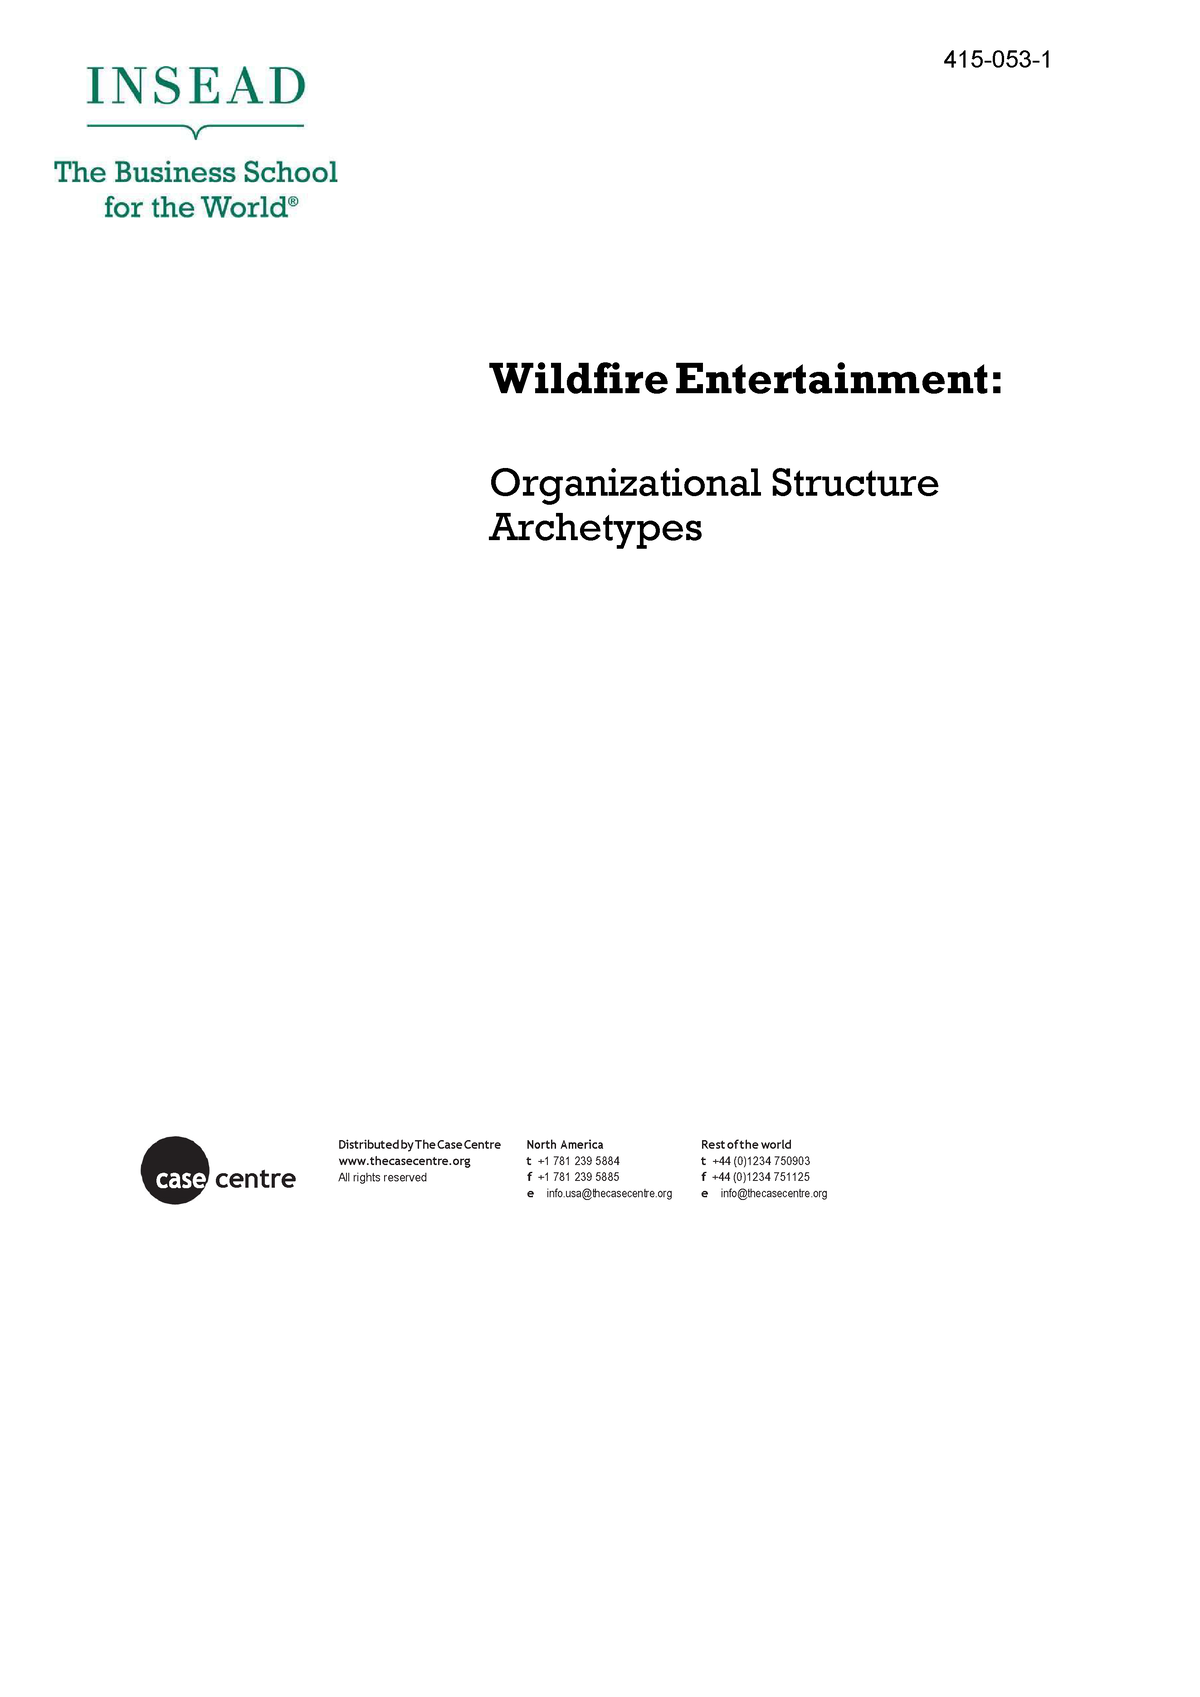 wildfire entertainment case study solution